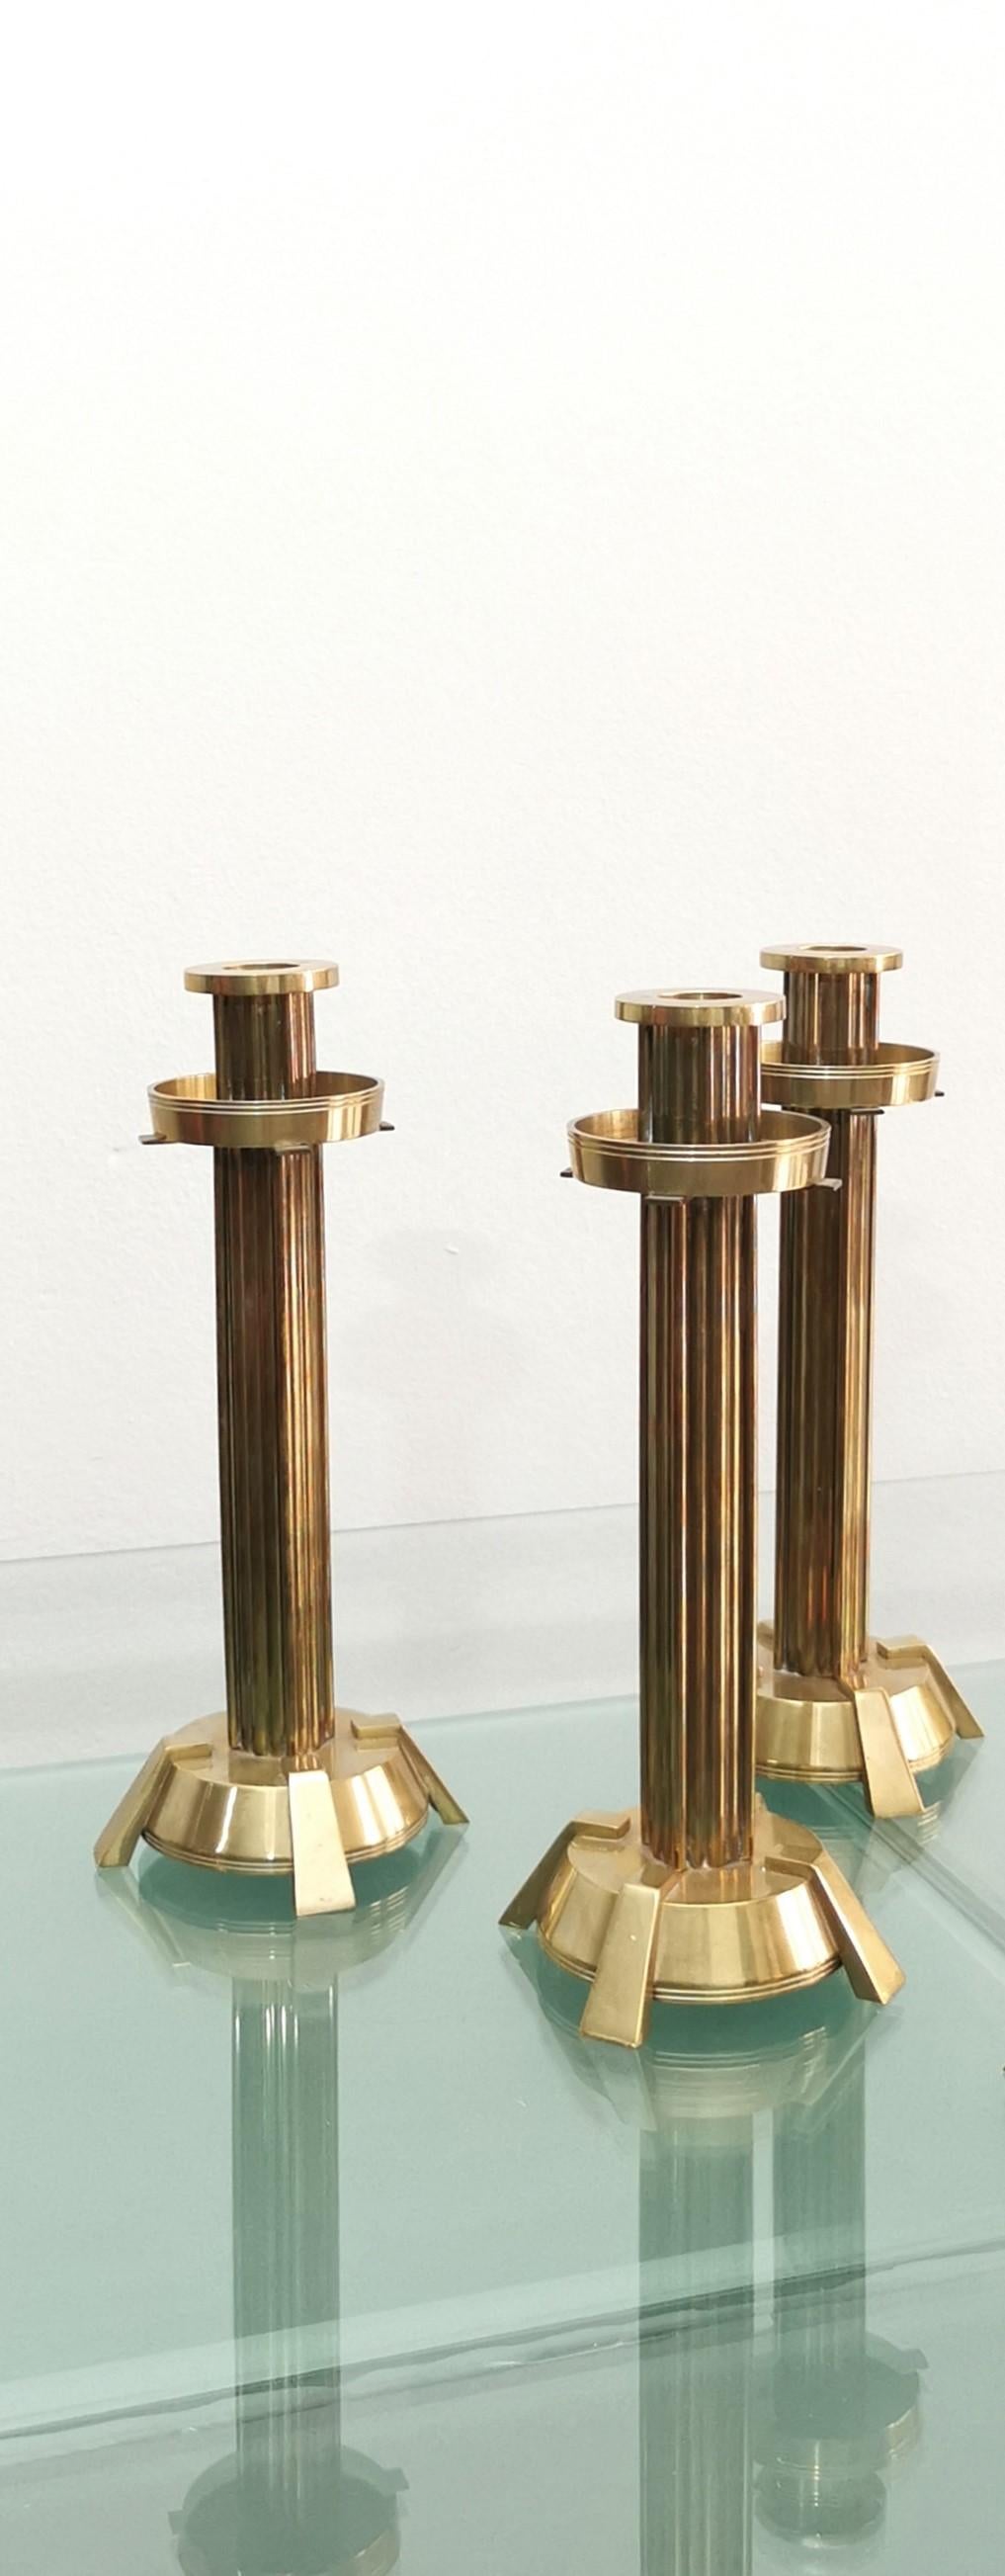 Italian Decorative Object Brass Candelabras Candle Holders Midcentury Italy 70s Set of 4 For Sale